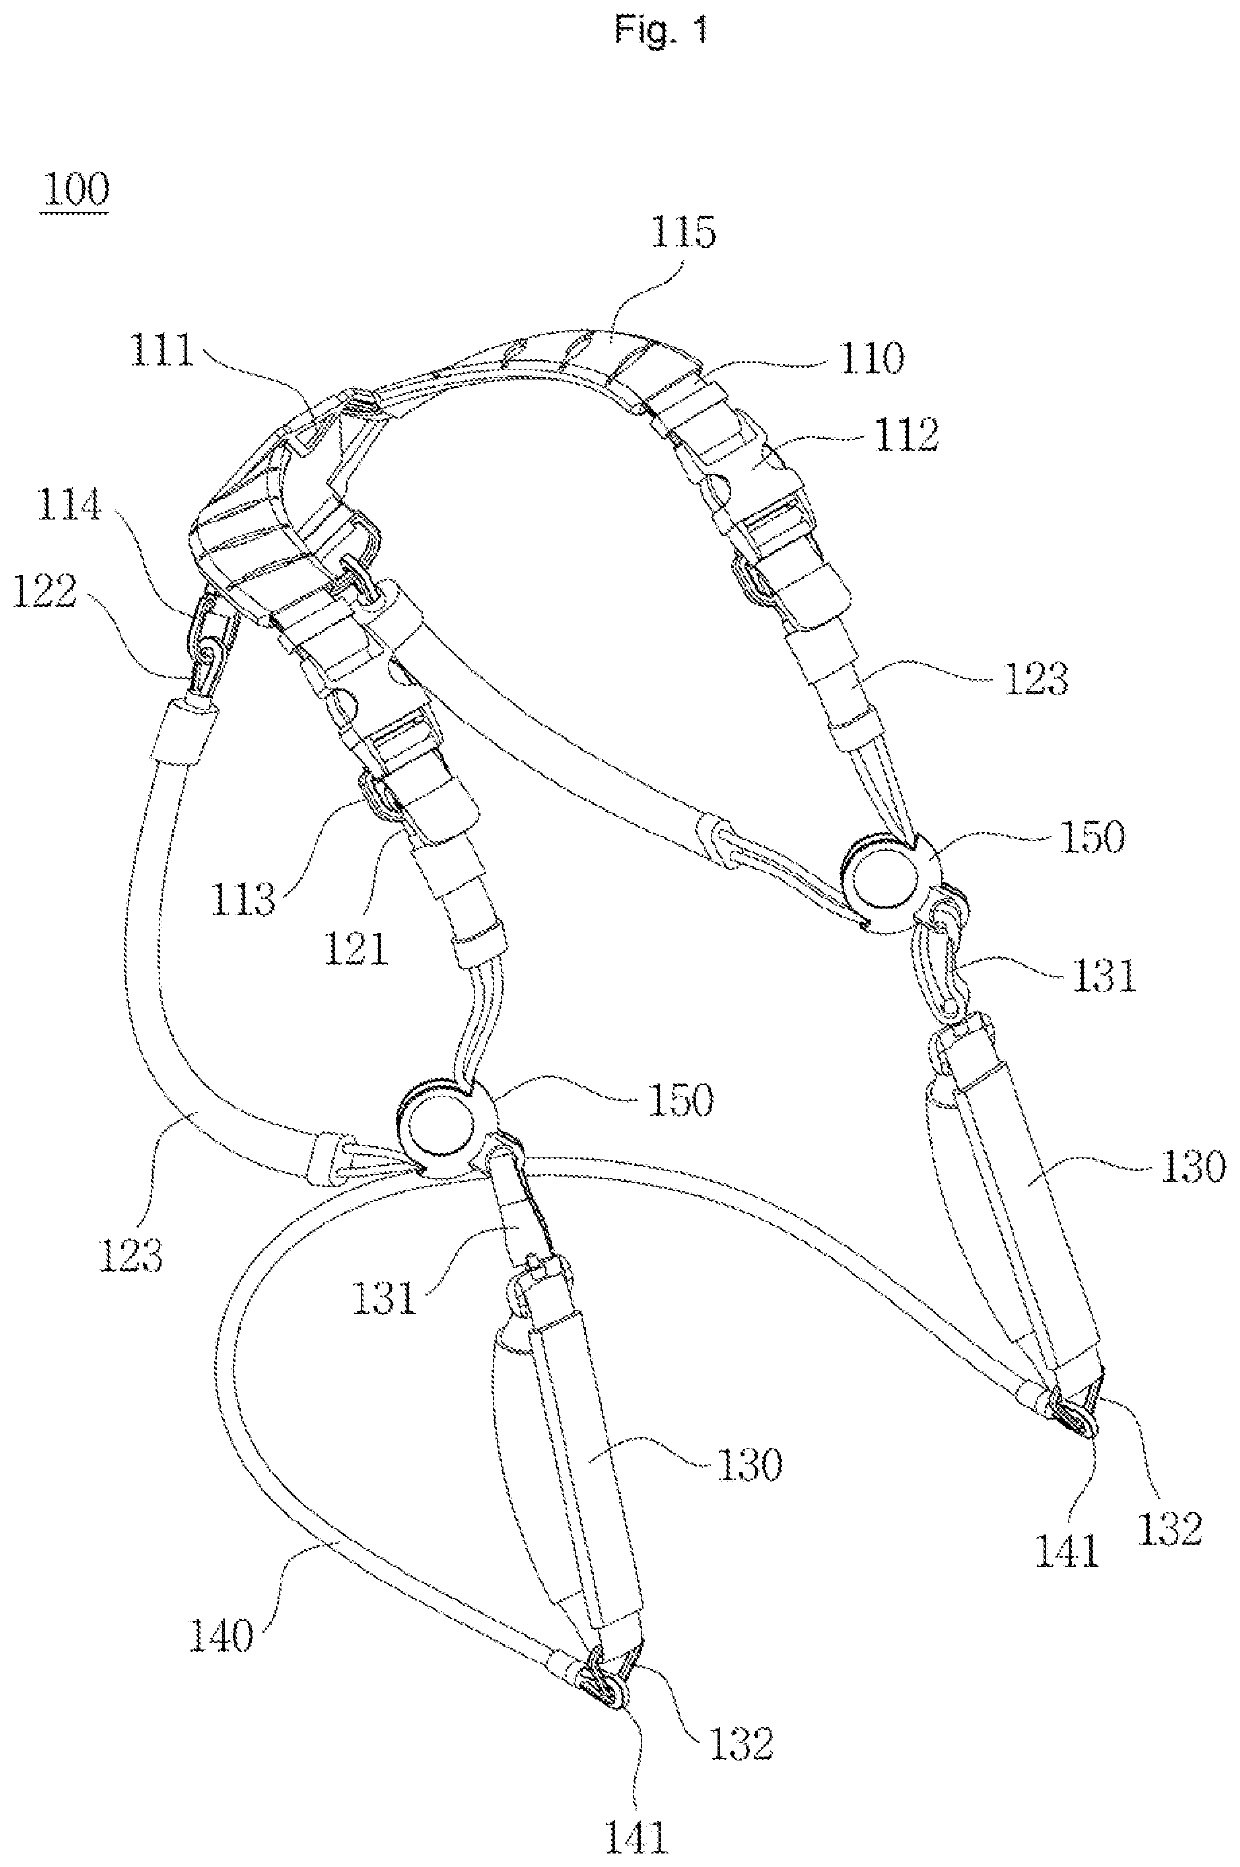 Wearable during-walking arm exercise device